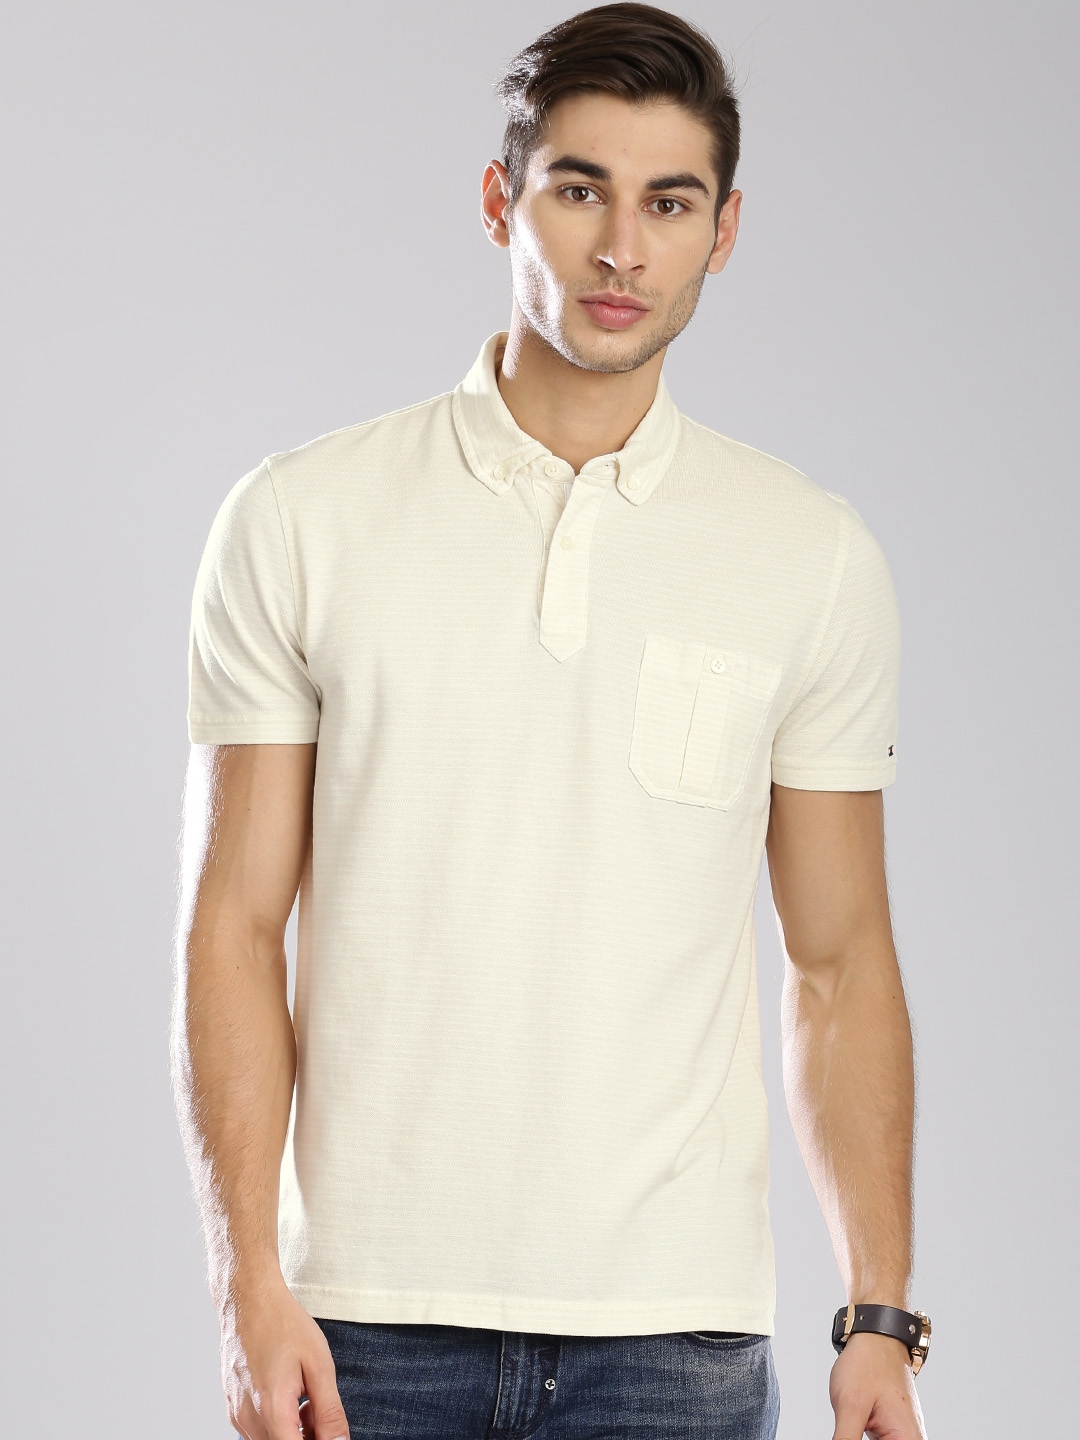 Buy Tommy Hilfiger Men Cream Colored Polo T Shirt - Tshirts for Men ...